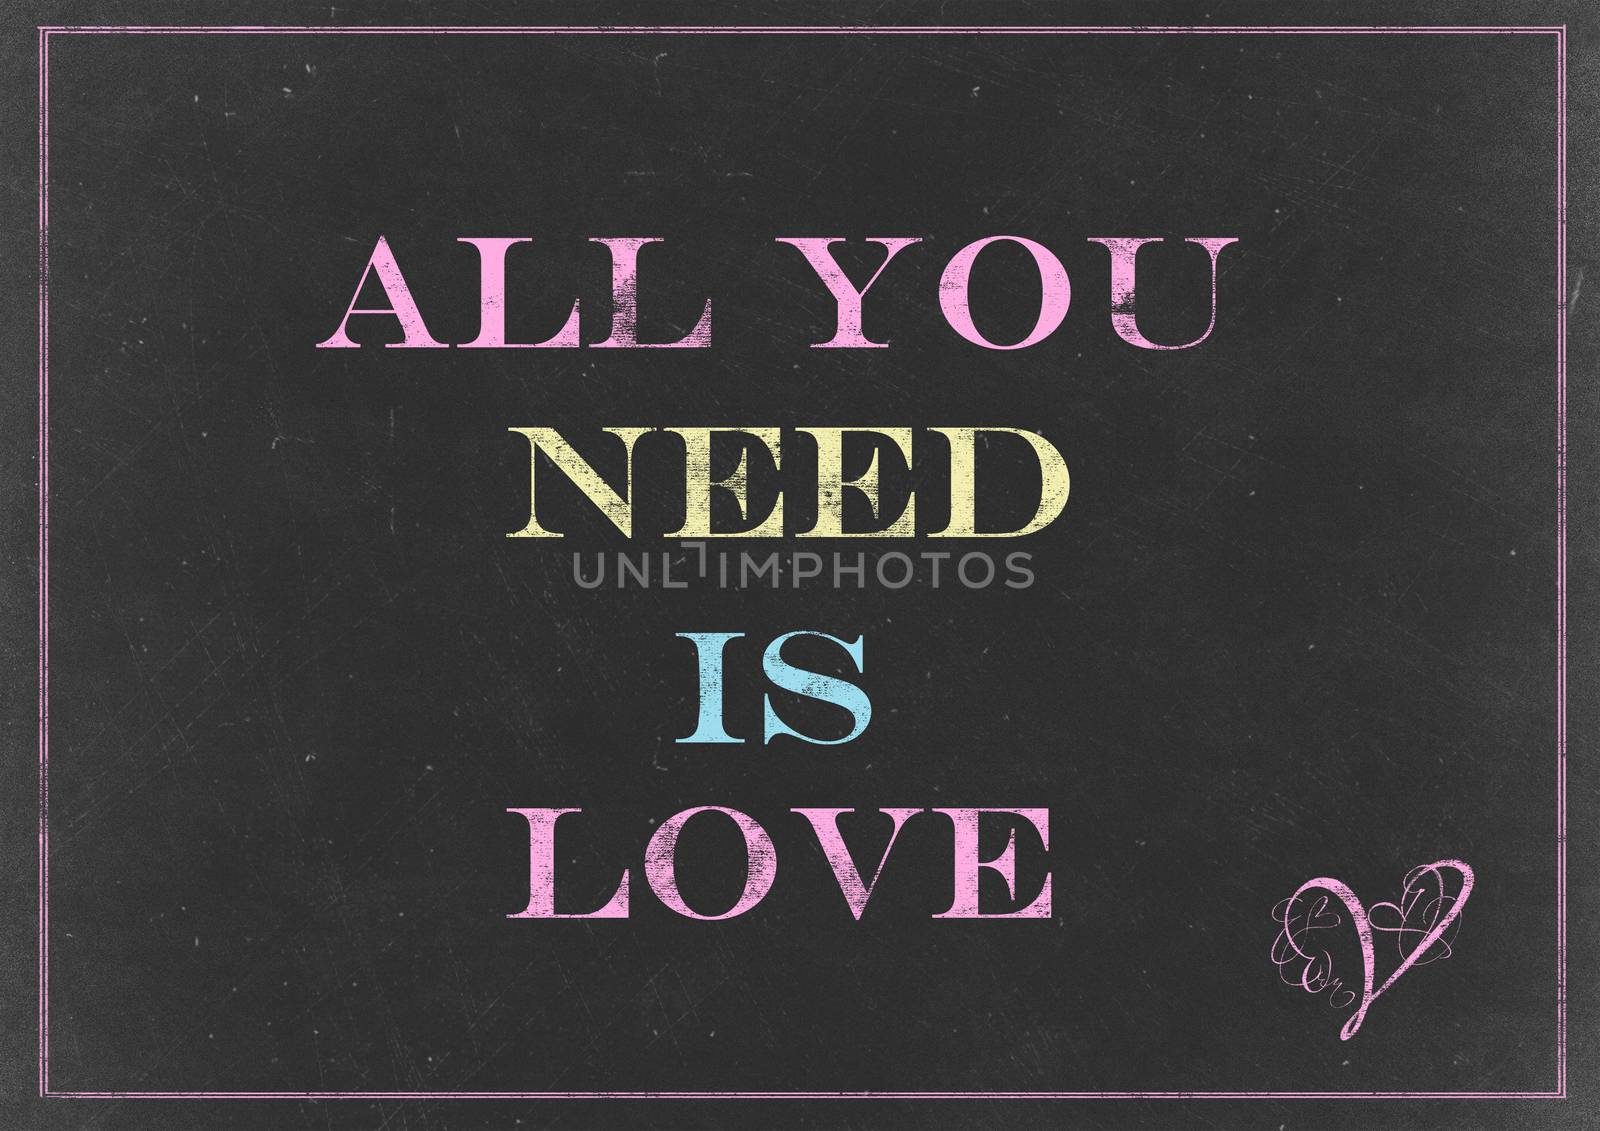 Chalk drawing - concept of "All you need is love" by urbanbuzz